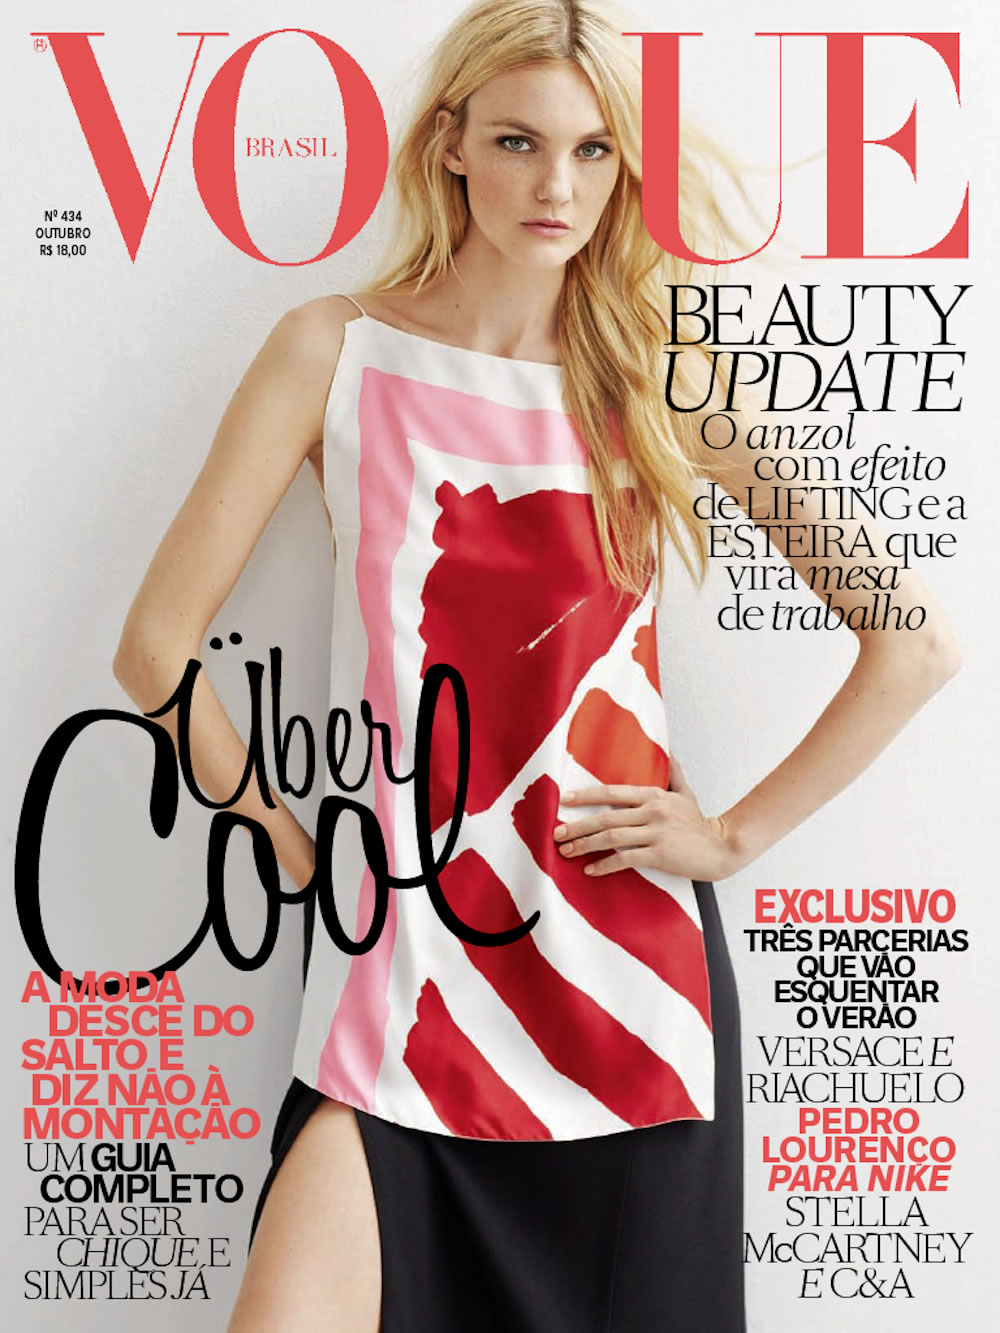 Beautiful Fashion Model From Brazil Caroline Trentini Modeling For The Cover Of Vogue Brazil (Vogue Brasil). How To Get Beautiful Skin, Healthy Skin, And Flawless Looking Skin. Skin Care Beauty Secrets From Supermodels.